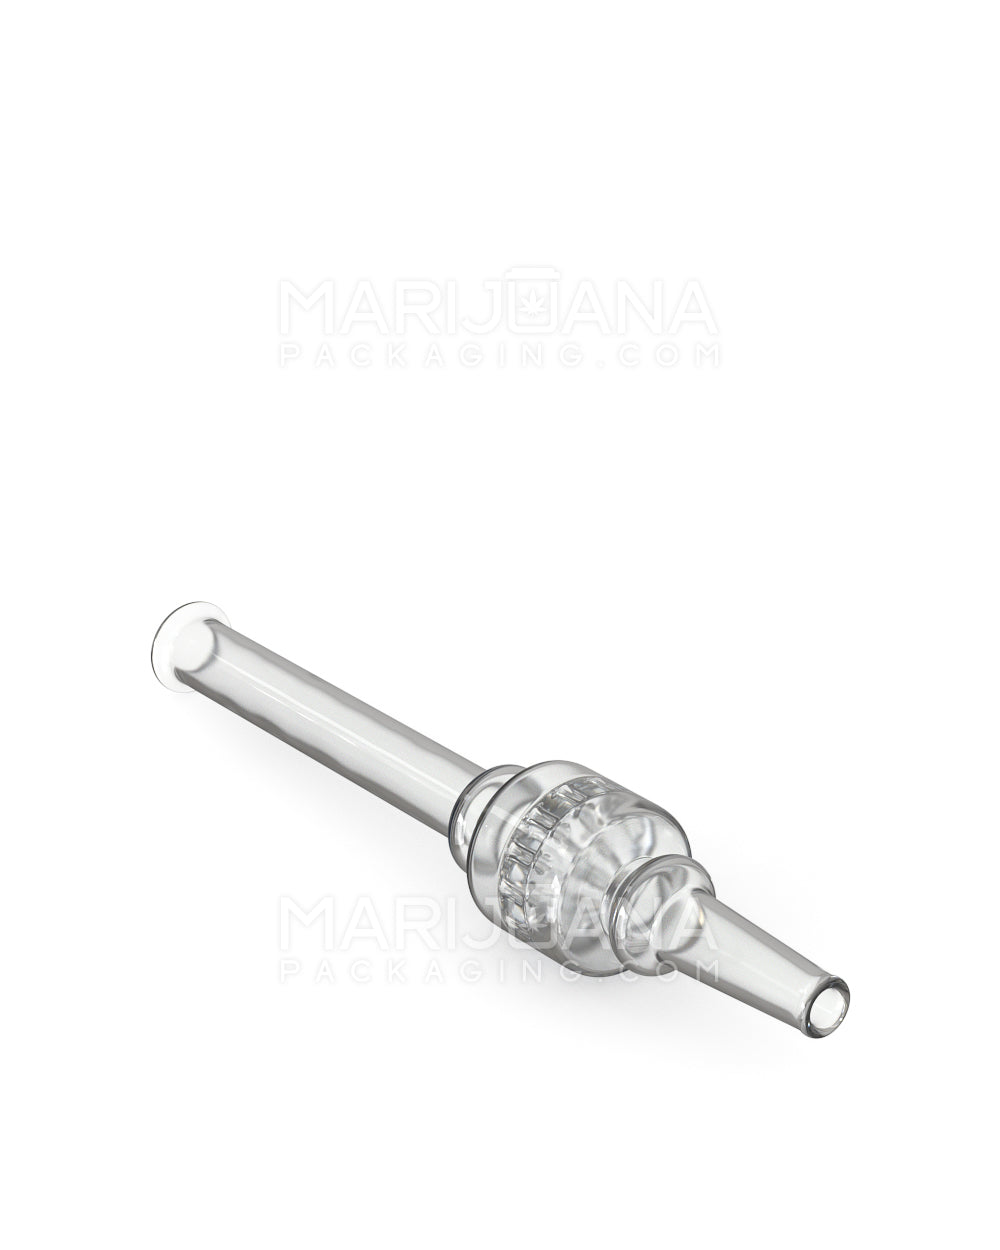 Honeycomb Percolator Dab Straw | 6in Long - Glass - Clear - 5